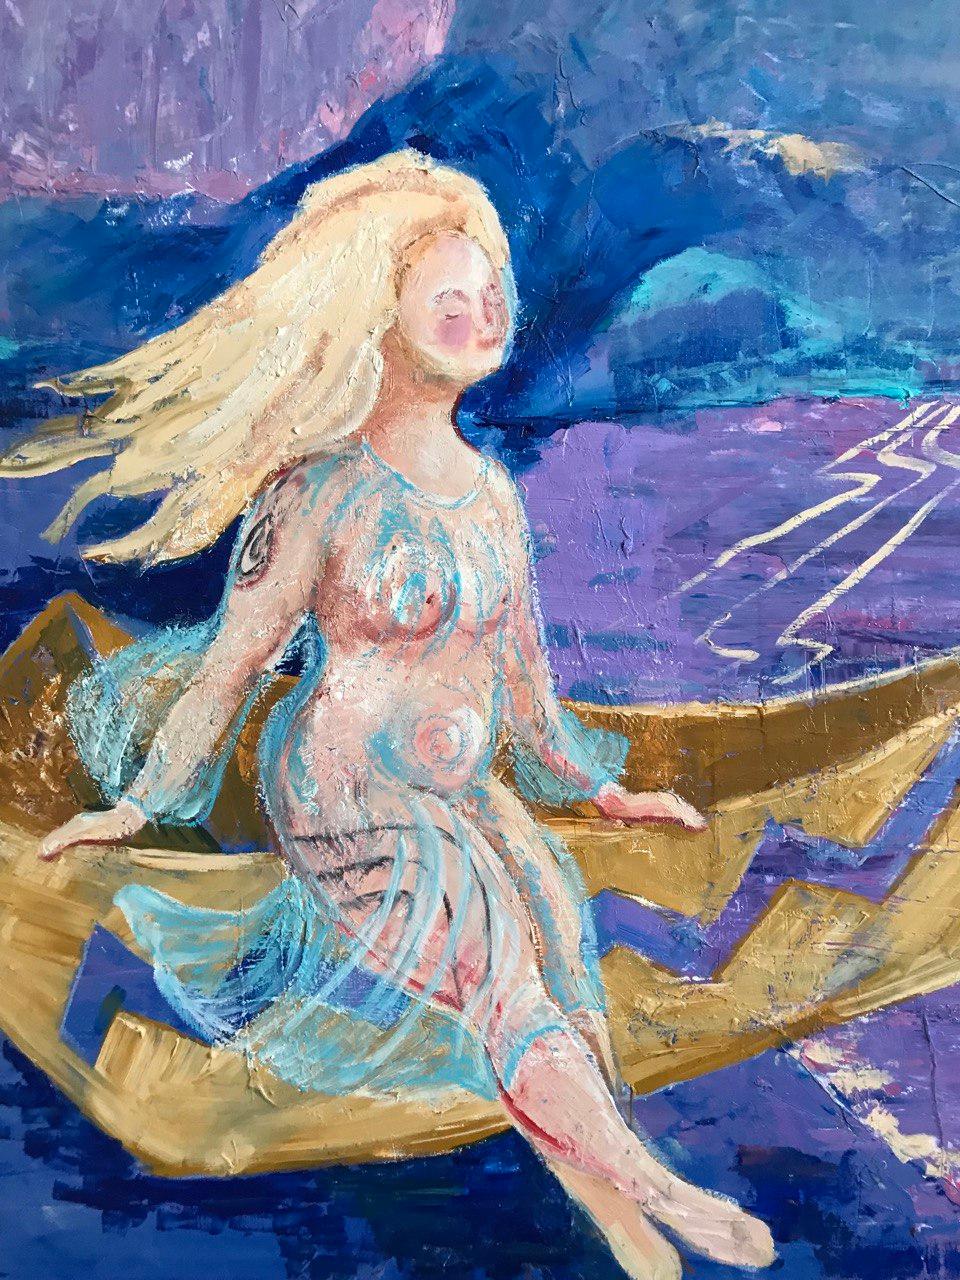 Scythian Sea, Cycle of Being original oil painting - Painting by Tetiana Pchelnykova